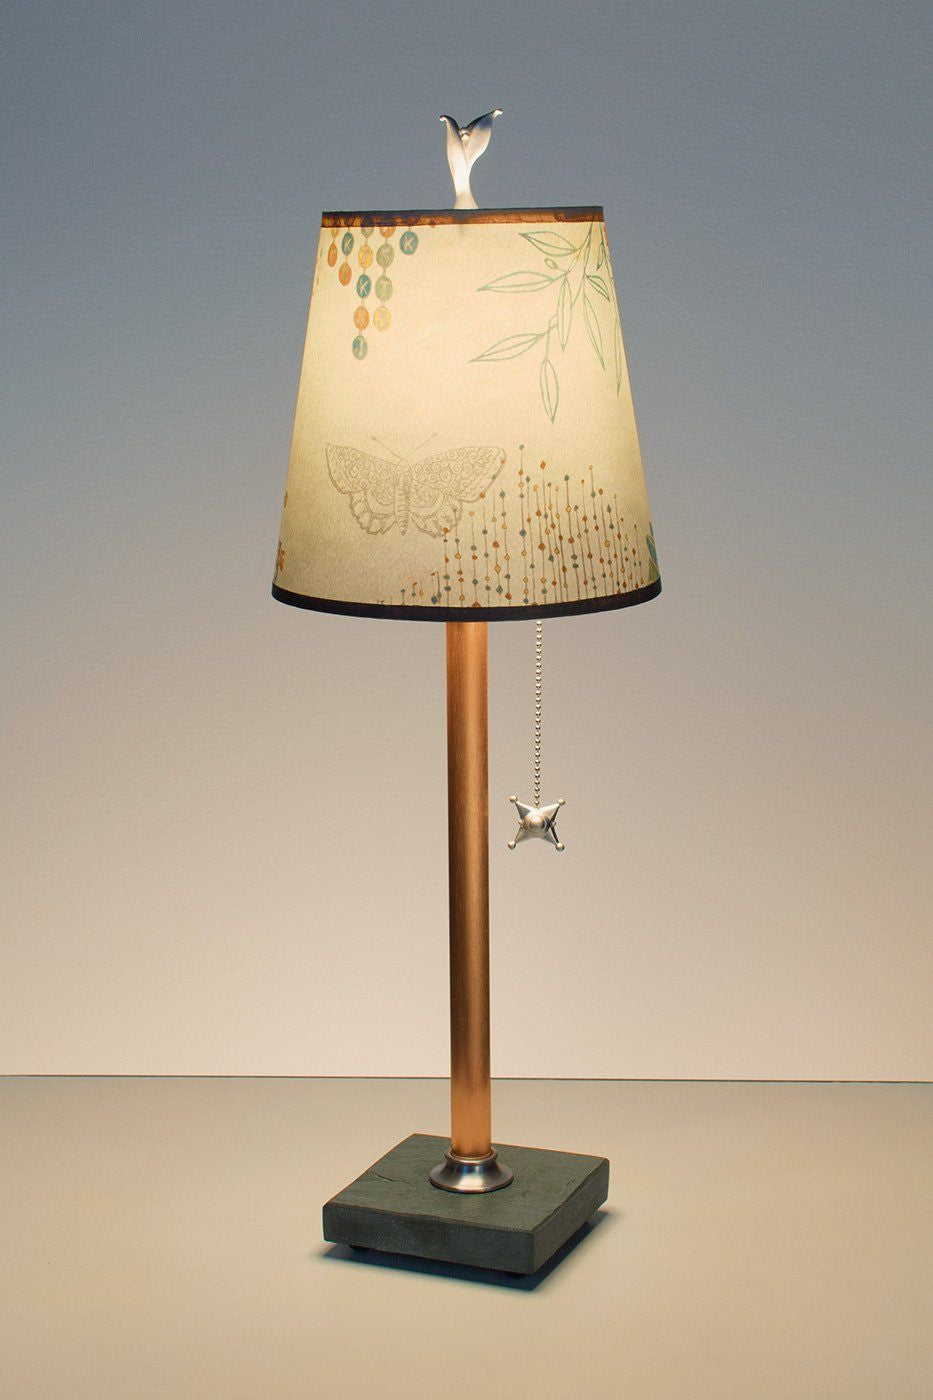 Janna Ugone & Co Table Lamps Copper Table Lamp with Small Drum Shade in Ecru Journey